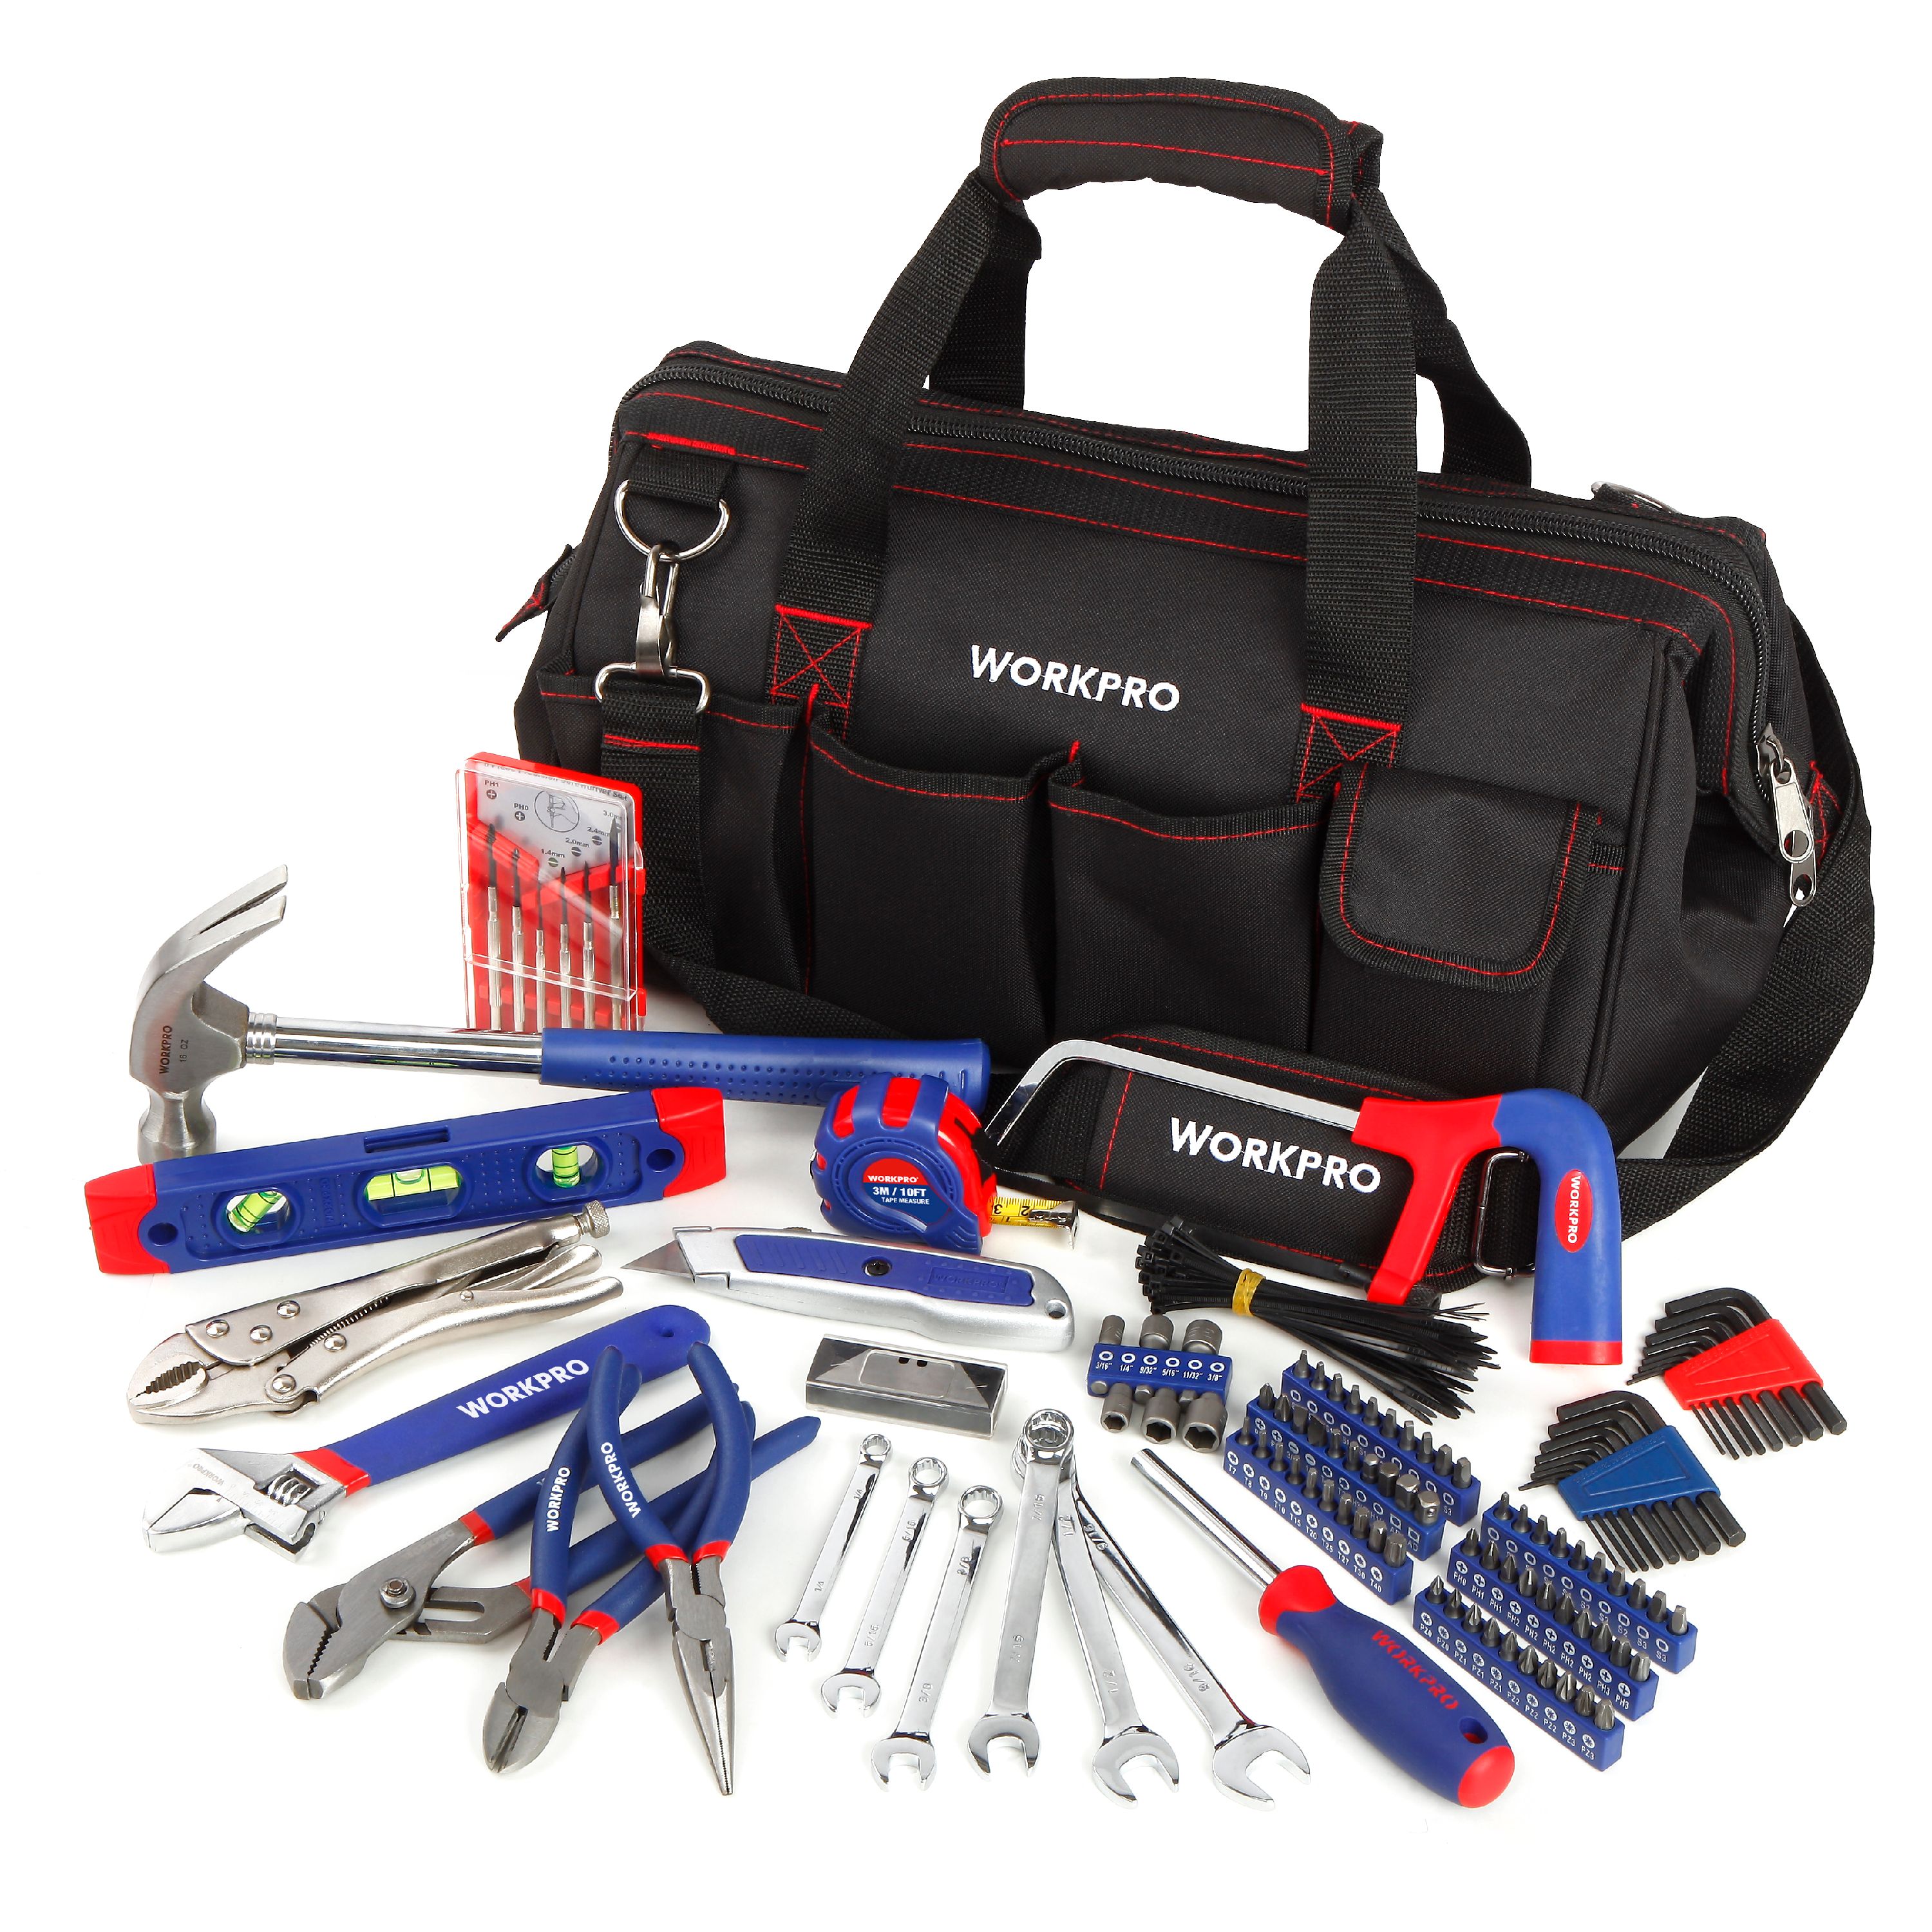 WORKPRO 156-Piece All-Purpose Home Repair Tool Set - image 1 of 10